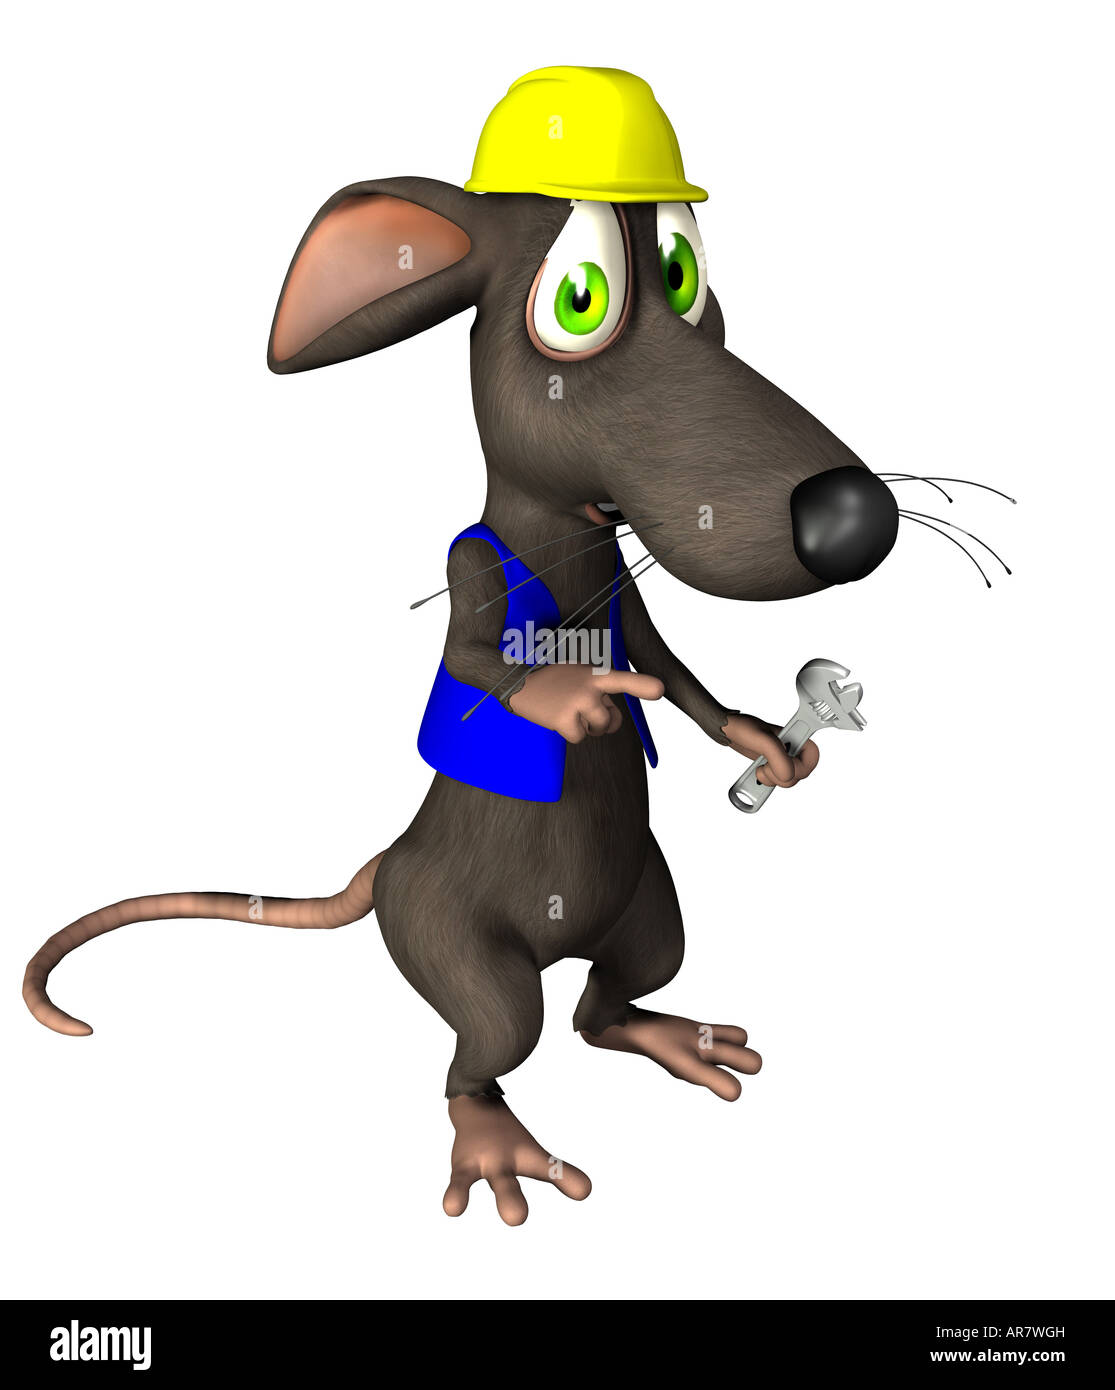 mouse with spanner Stock Photo